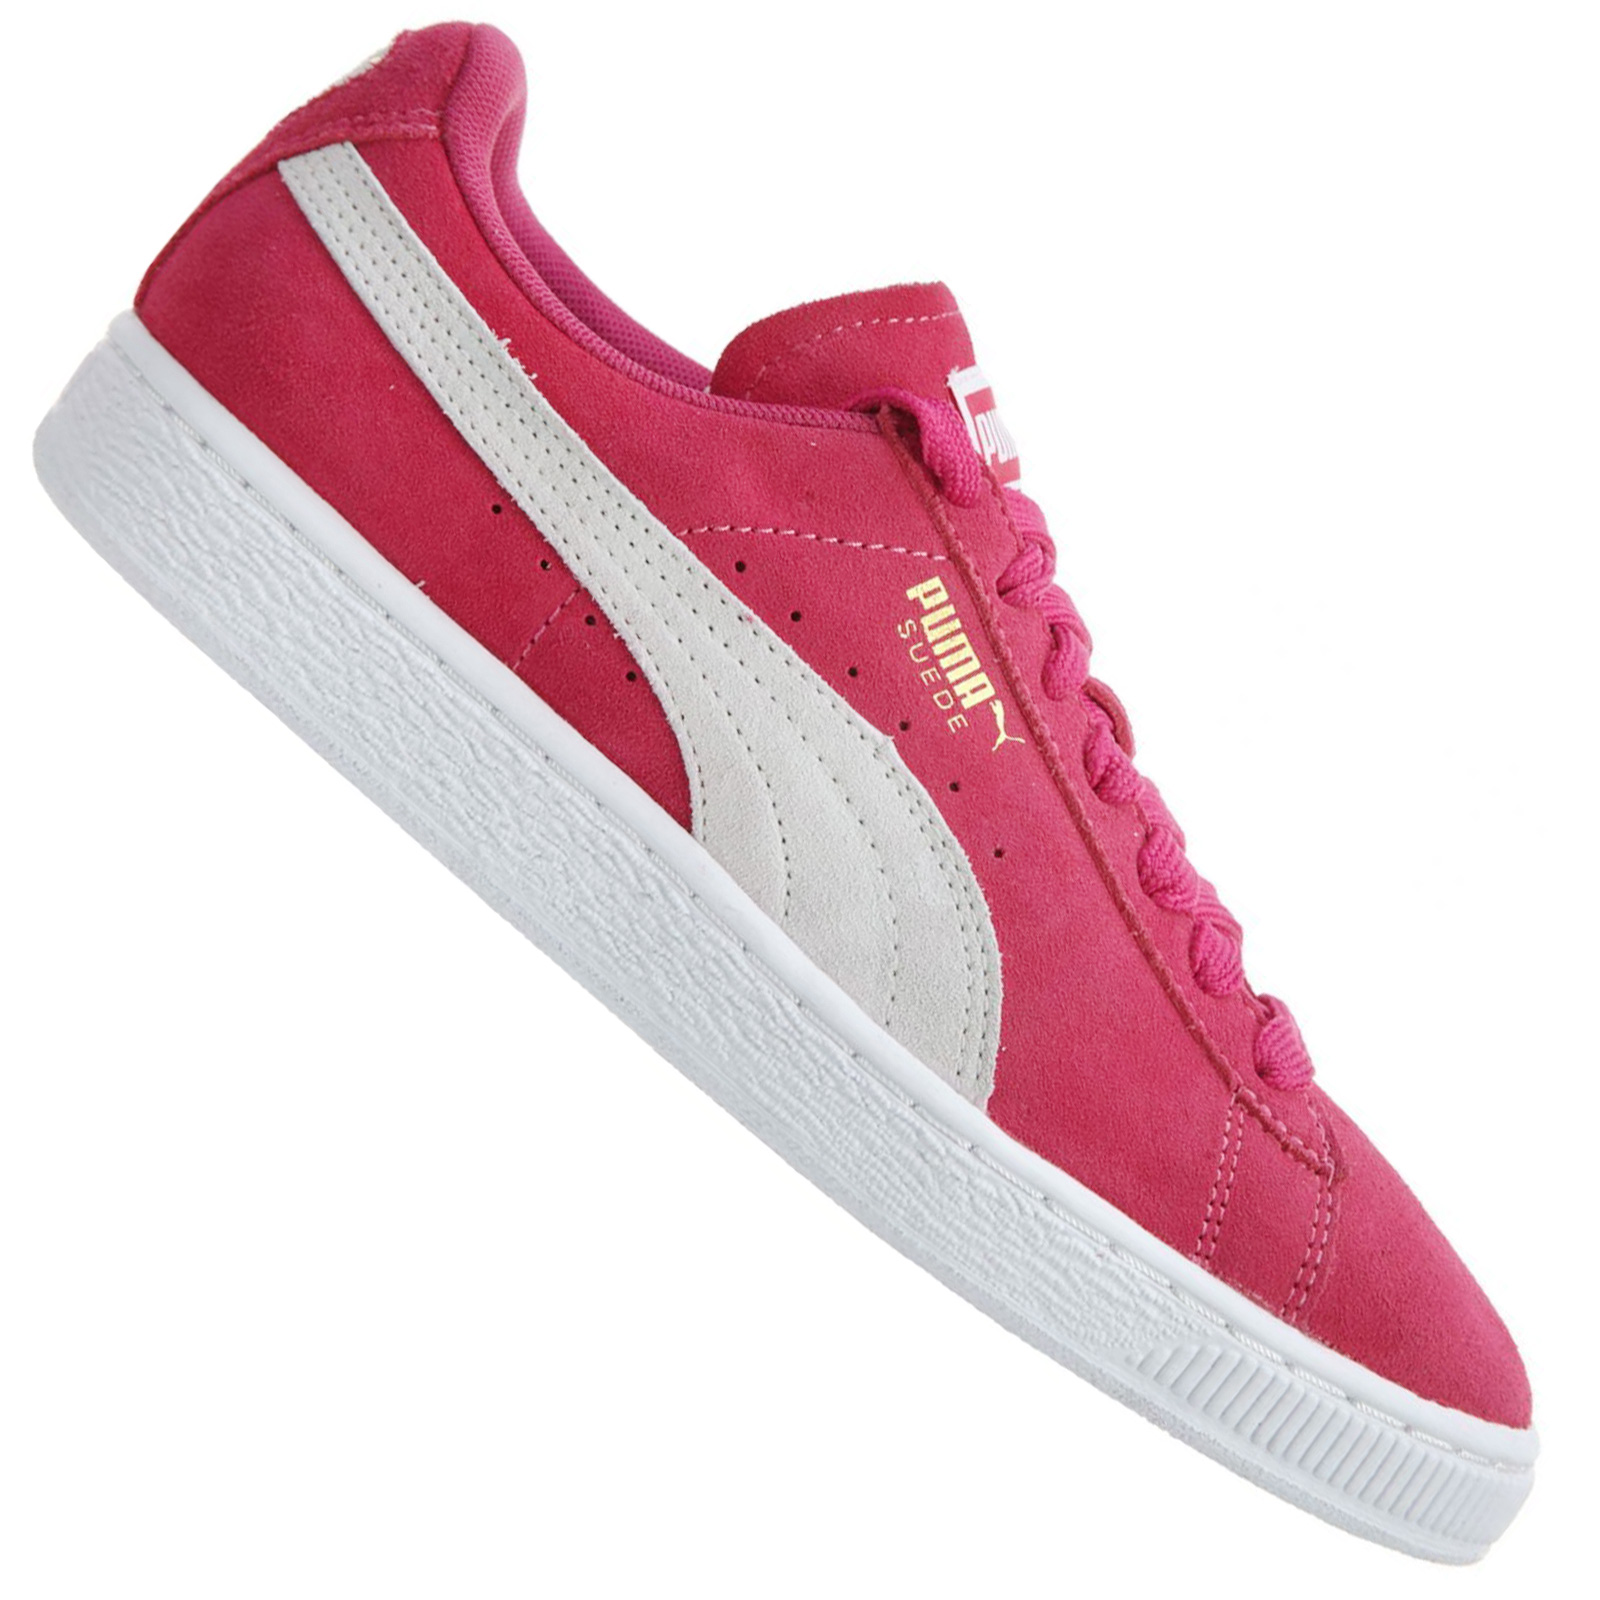 puma shoes suede pink